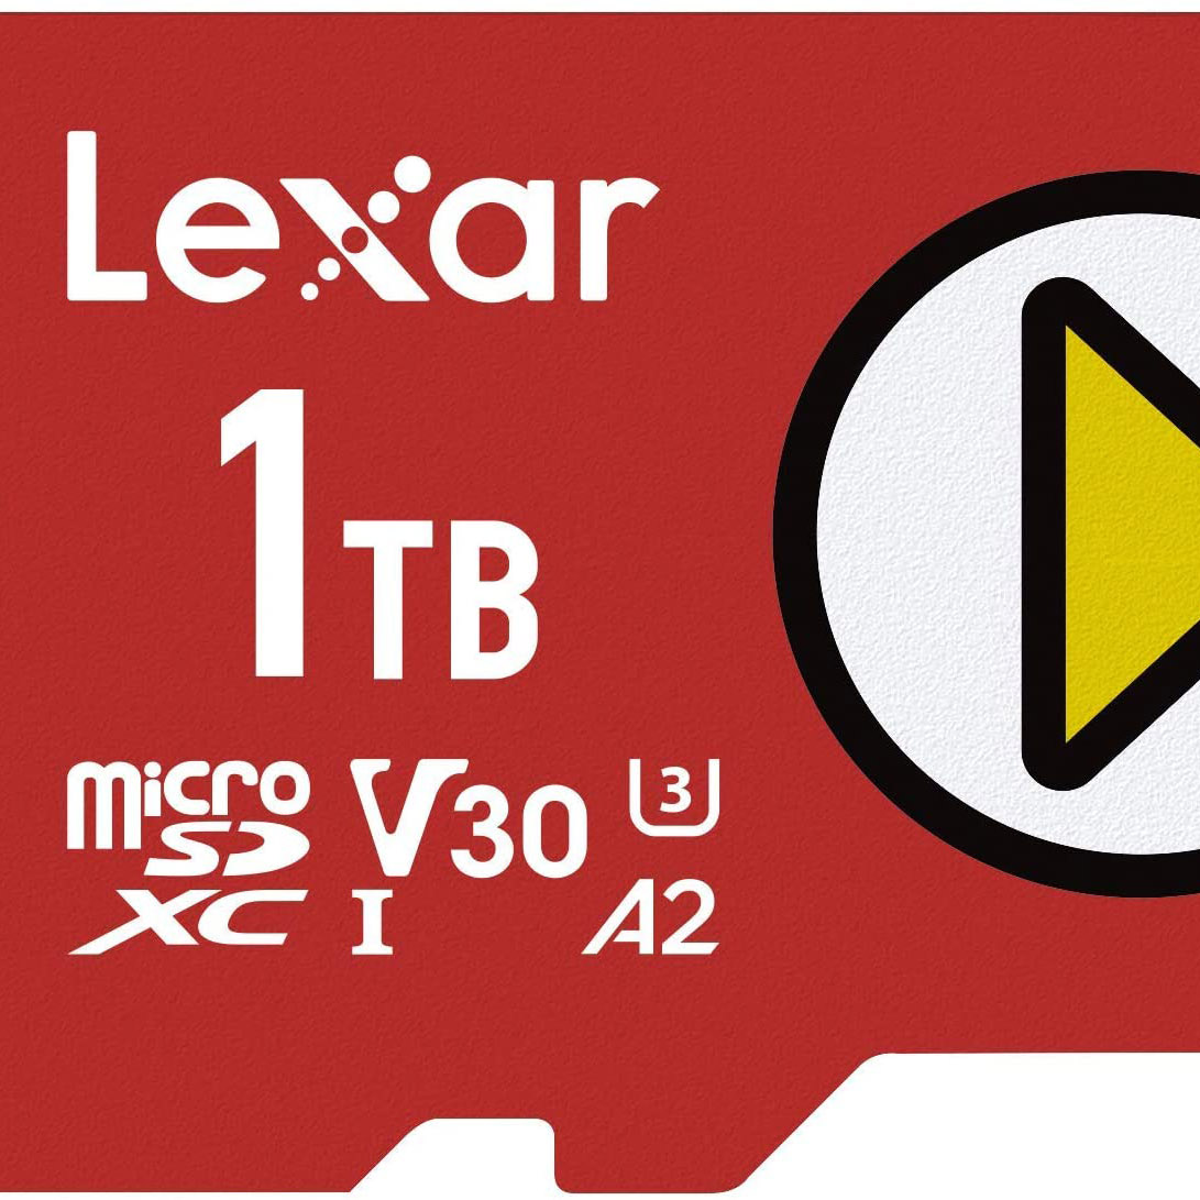 Get Lexar's 1TB Play Micro SD card for just £67 after an